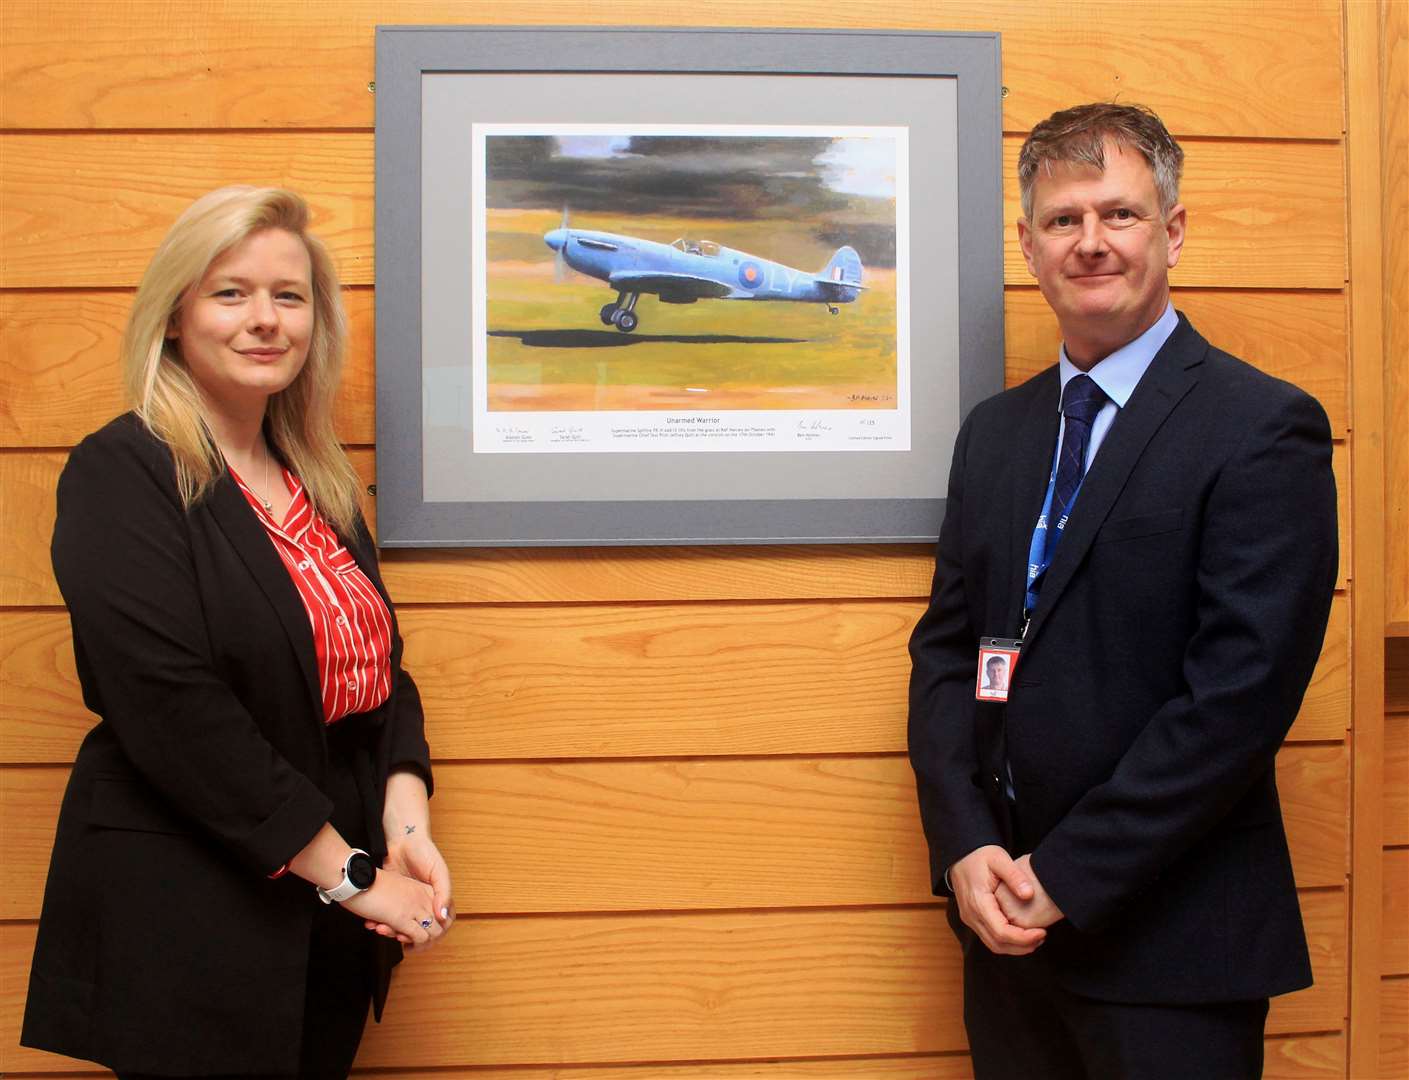 Onor Crummay, from the Spitfire AA810 restoration project, and Dougie Cook, north airports general manager at Highlands and islands Airports Limited, unveiled a limited-edition print of Spitfire AA810 by aviation artist Ben Holmes. Picture: Alan Hendry